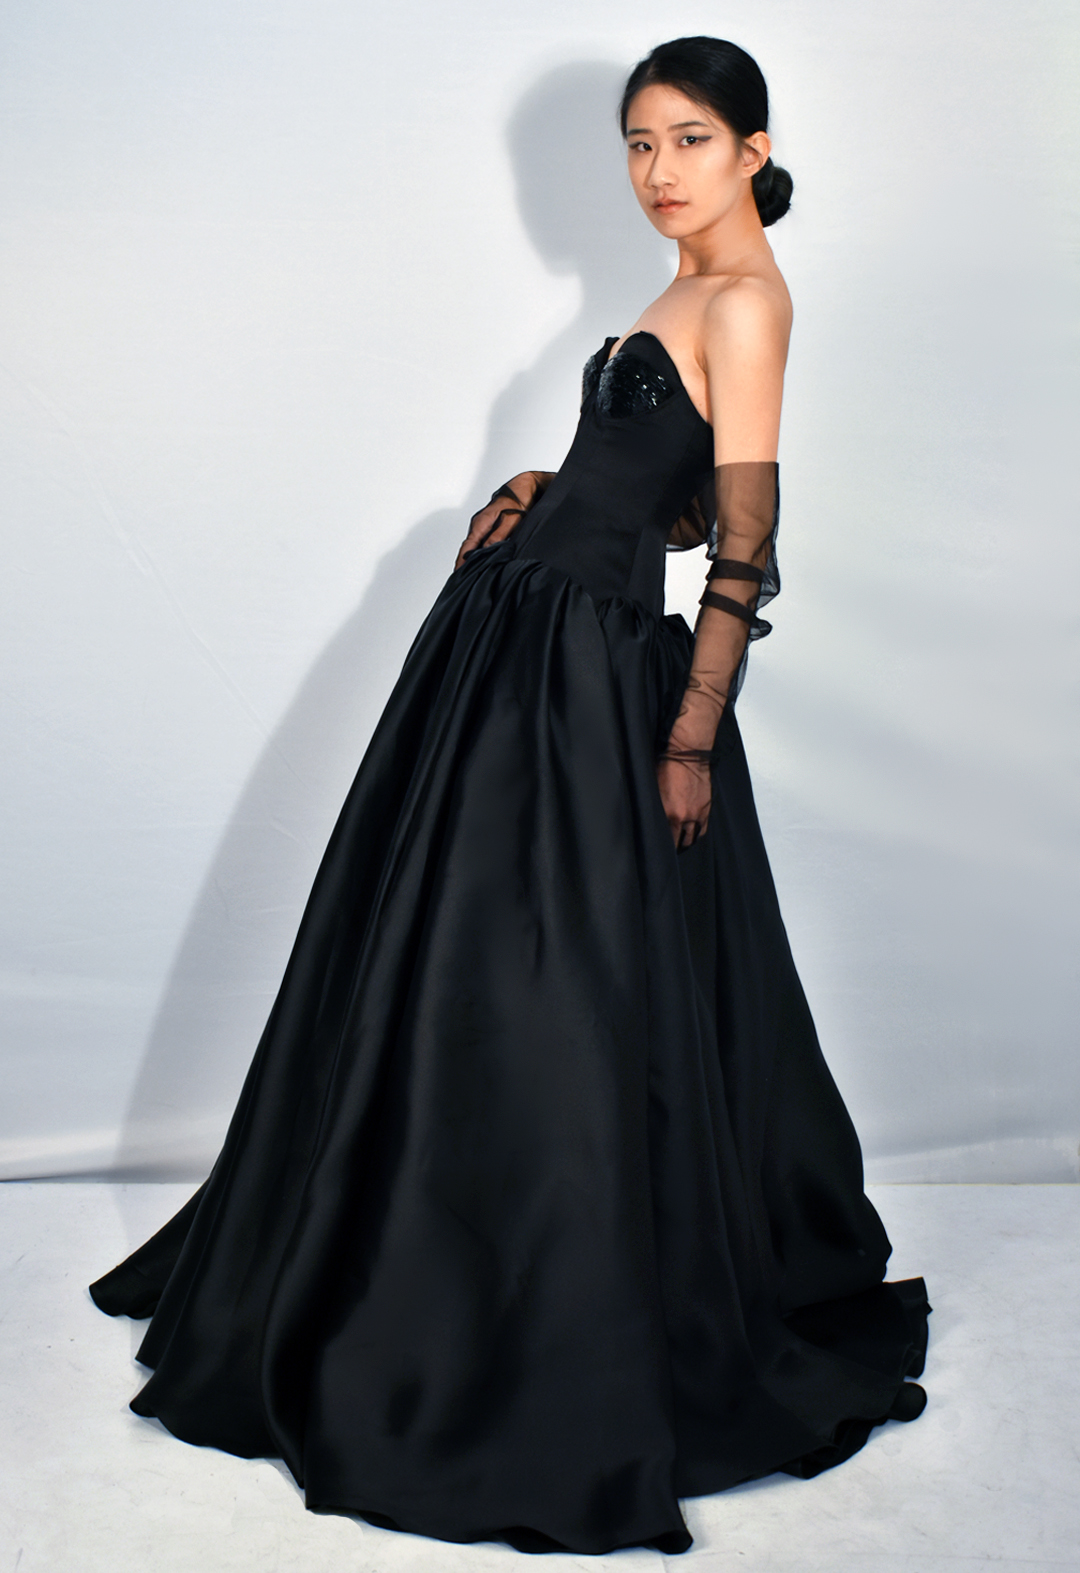 This black gown is made from 100 percent silk. The photo shows a side view of a woman wearing a black silk gown with beading covering three-quarters of the bodice cups. The floor-length gown has a drop-waist duchesse satin bodice with cone-like satin-faced organza skirt panels gathered along the drop-waist, pooling onto the floor. The model is wearing black tulle gloves that cover three-quarters of her arms. Her face is facing the viewer. The background is white.